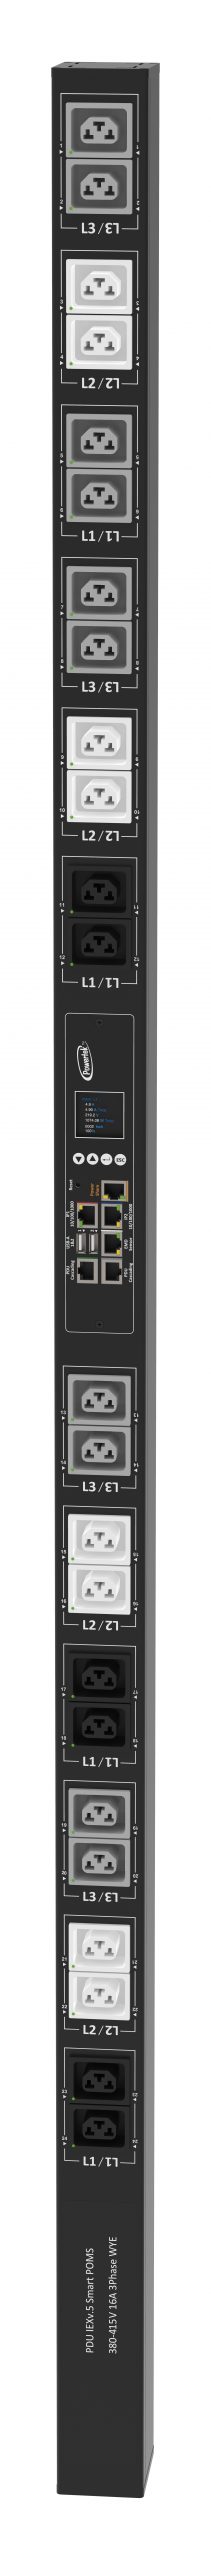 IPDU Per Outlet Monitored Metered Intelligent Power Distribution with remote internet access for information per outlet